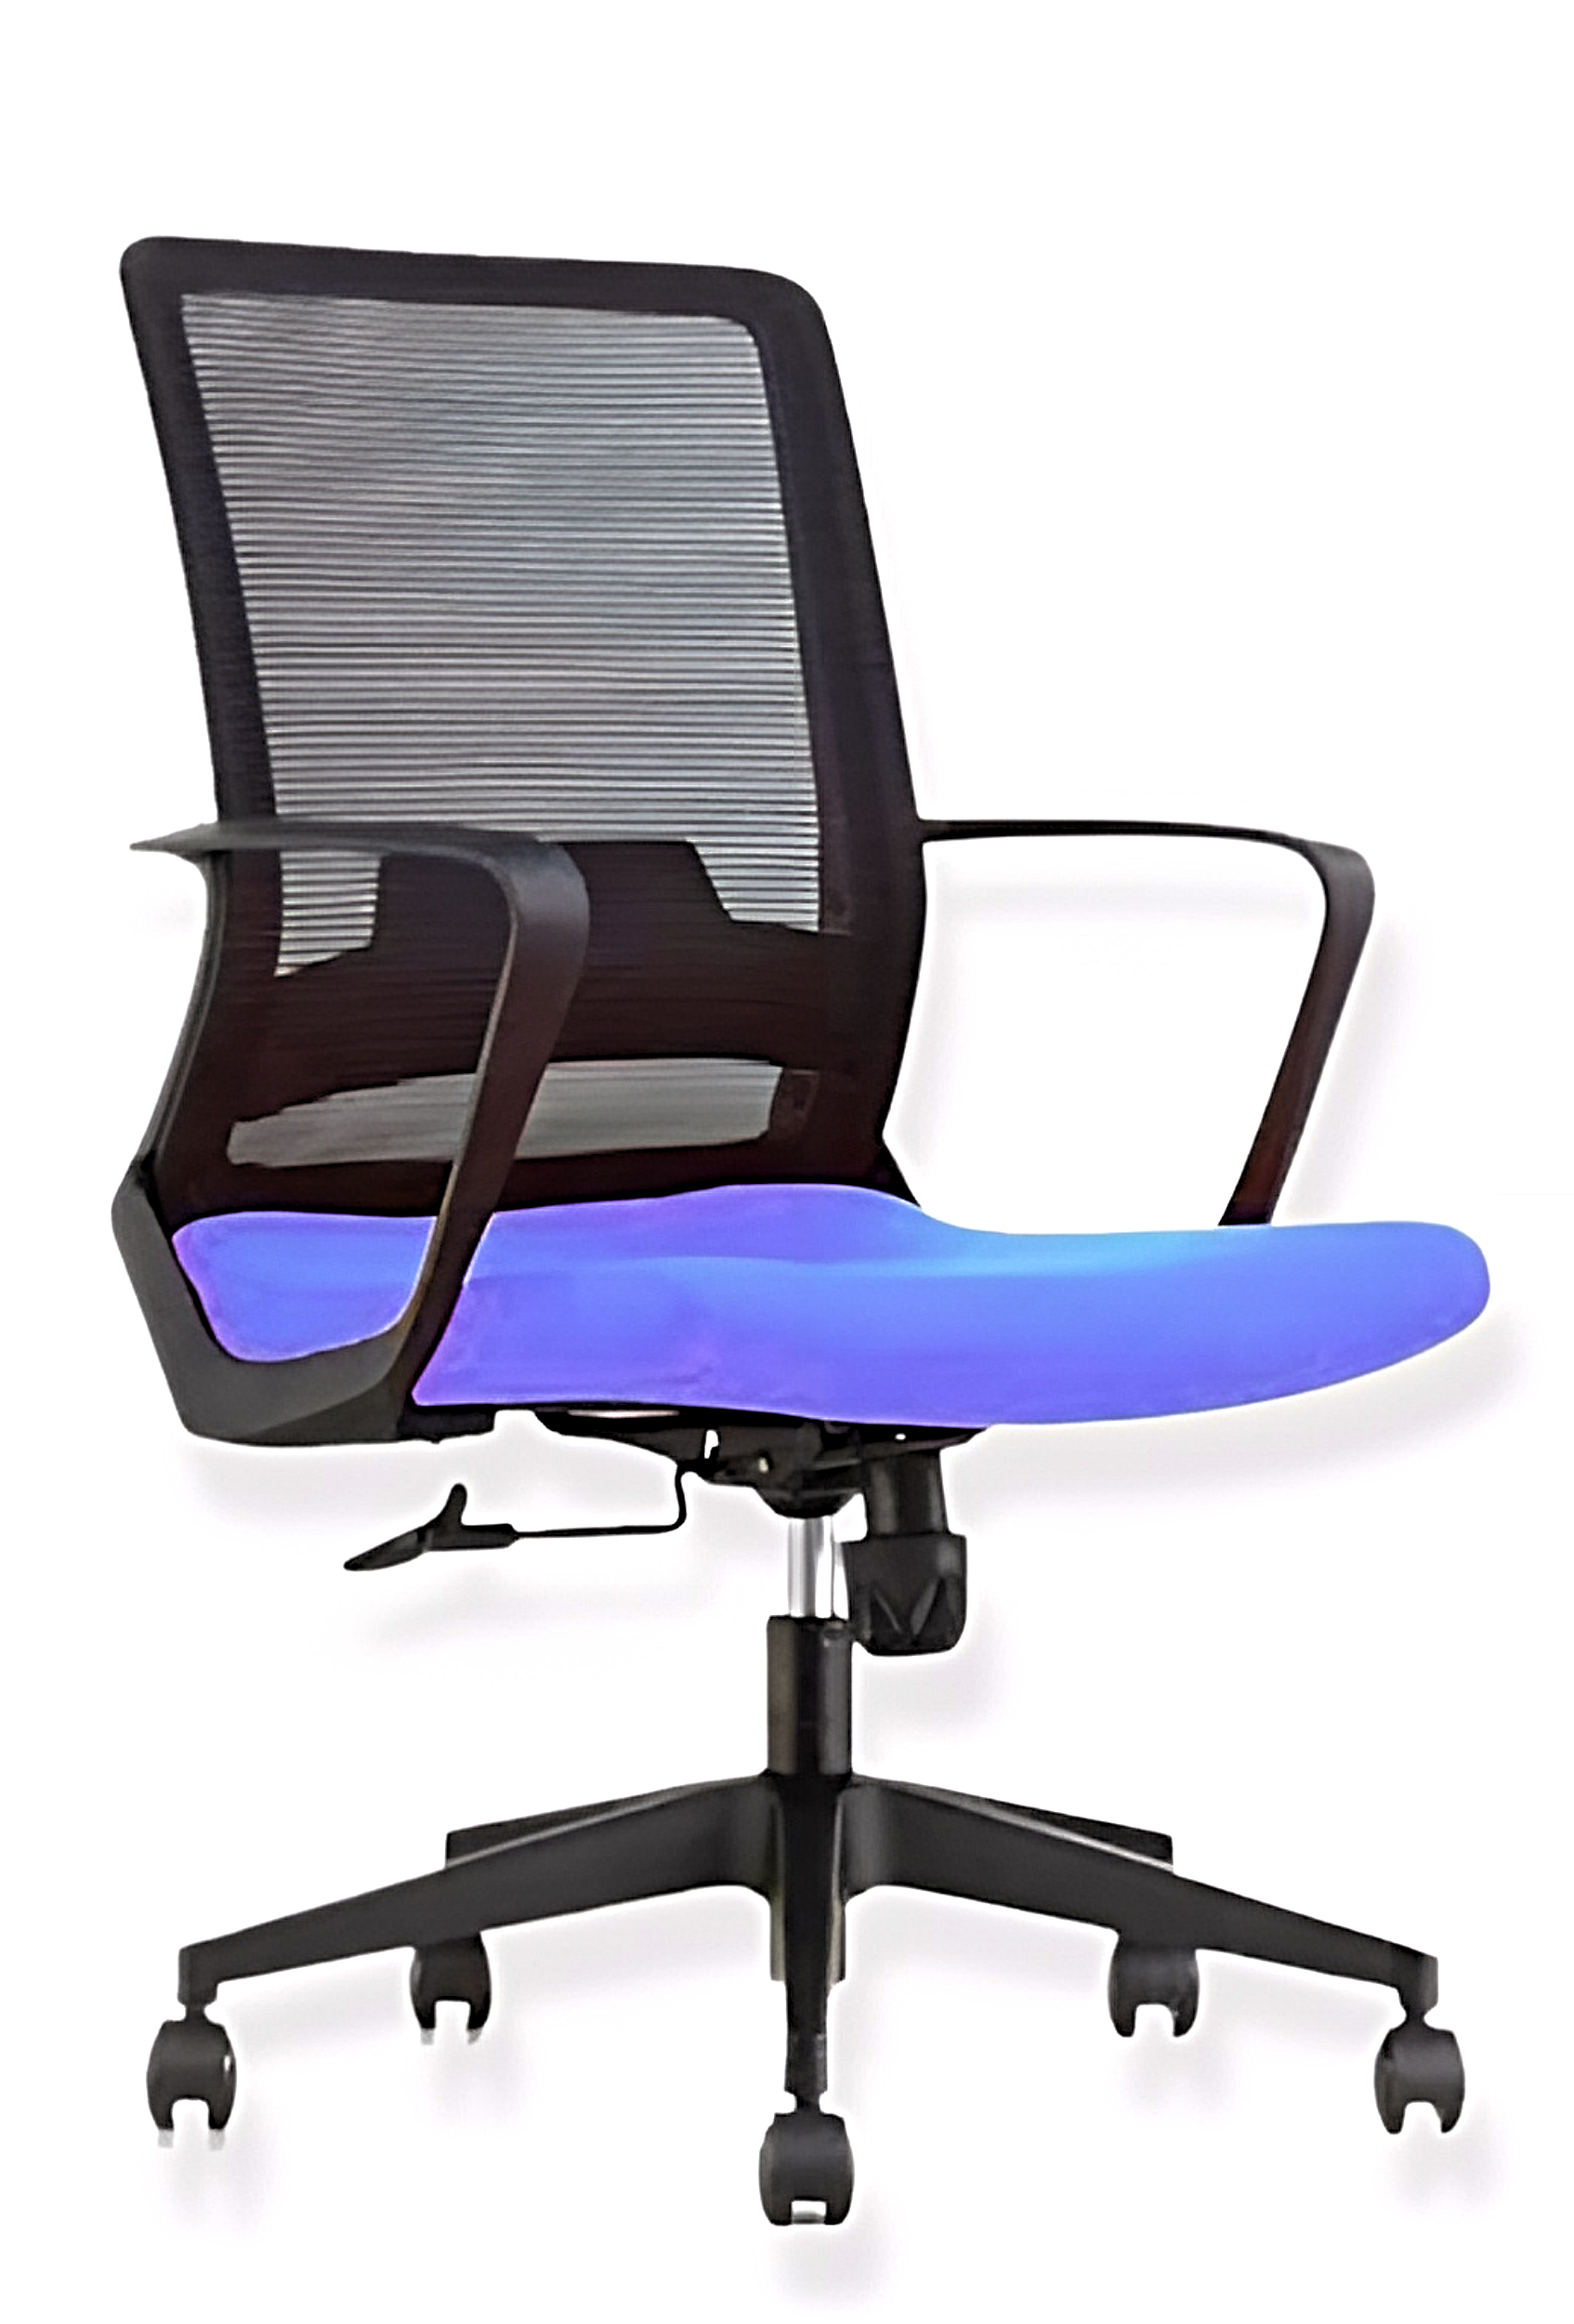 Concise Computer Chairs